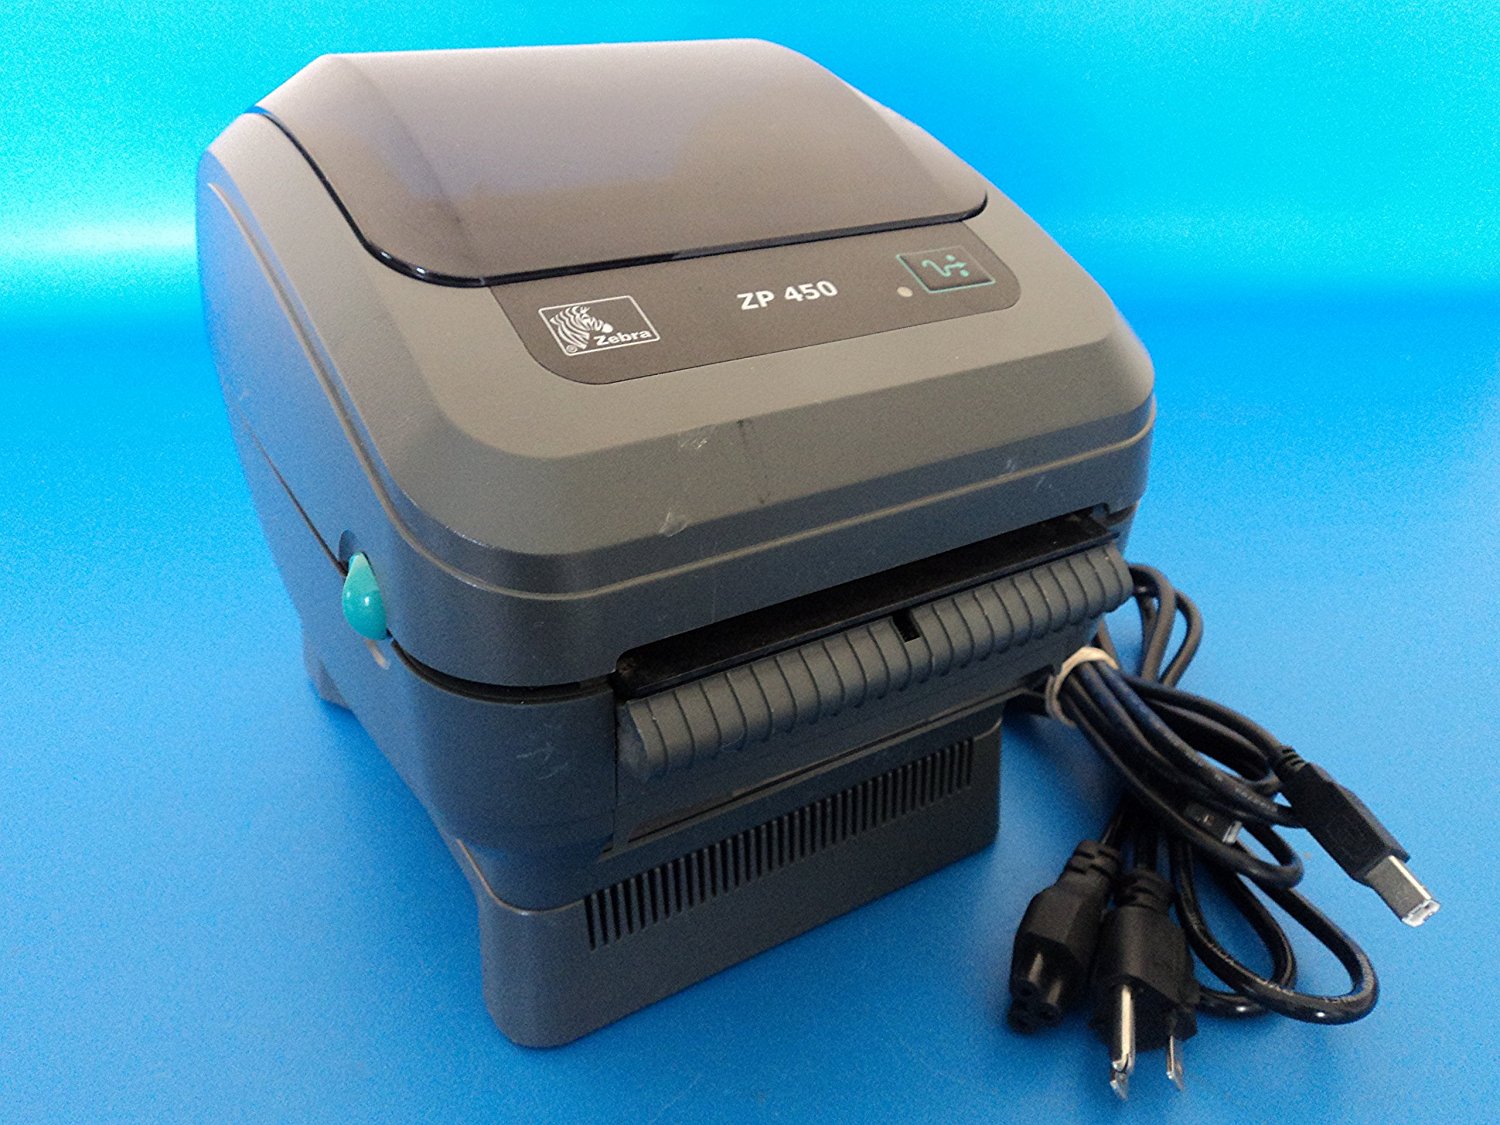 Zebra Zp 450 Usb Thermal Label Printer With Cables Zp450 0501 0006a N3 Free Image Download 9921